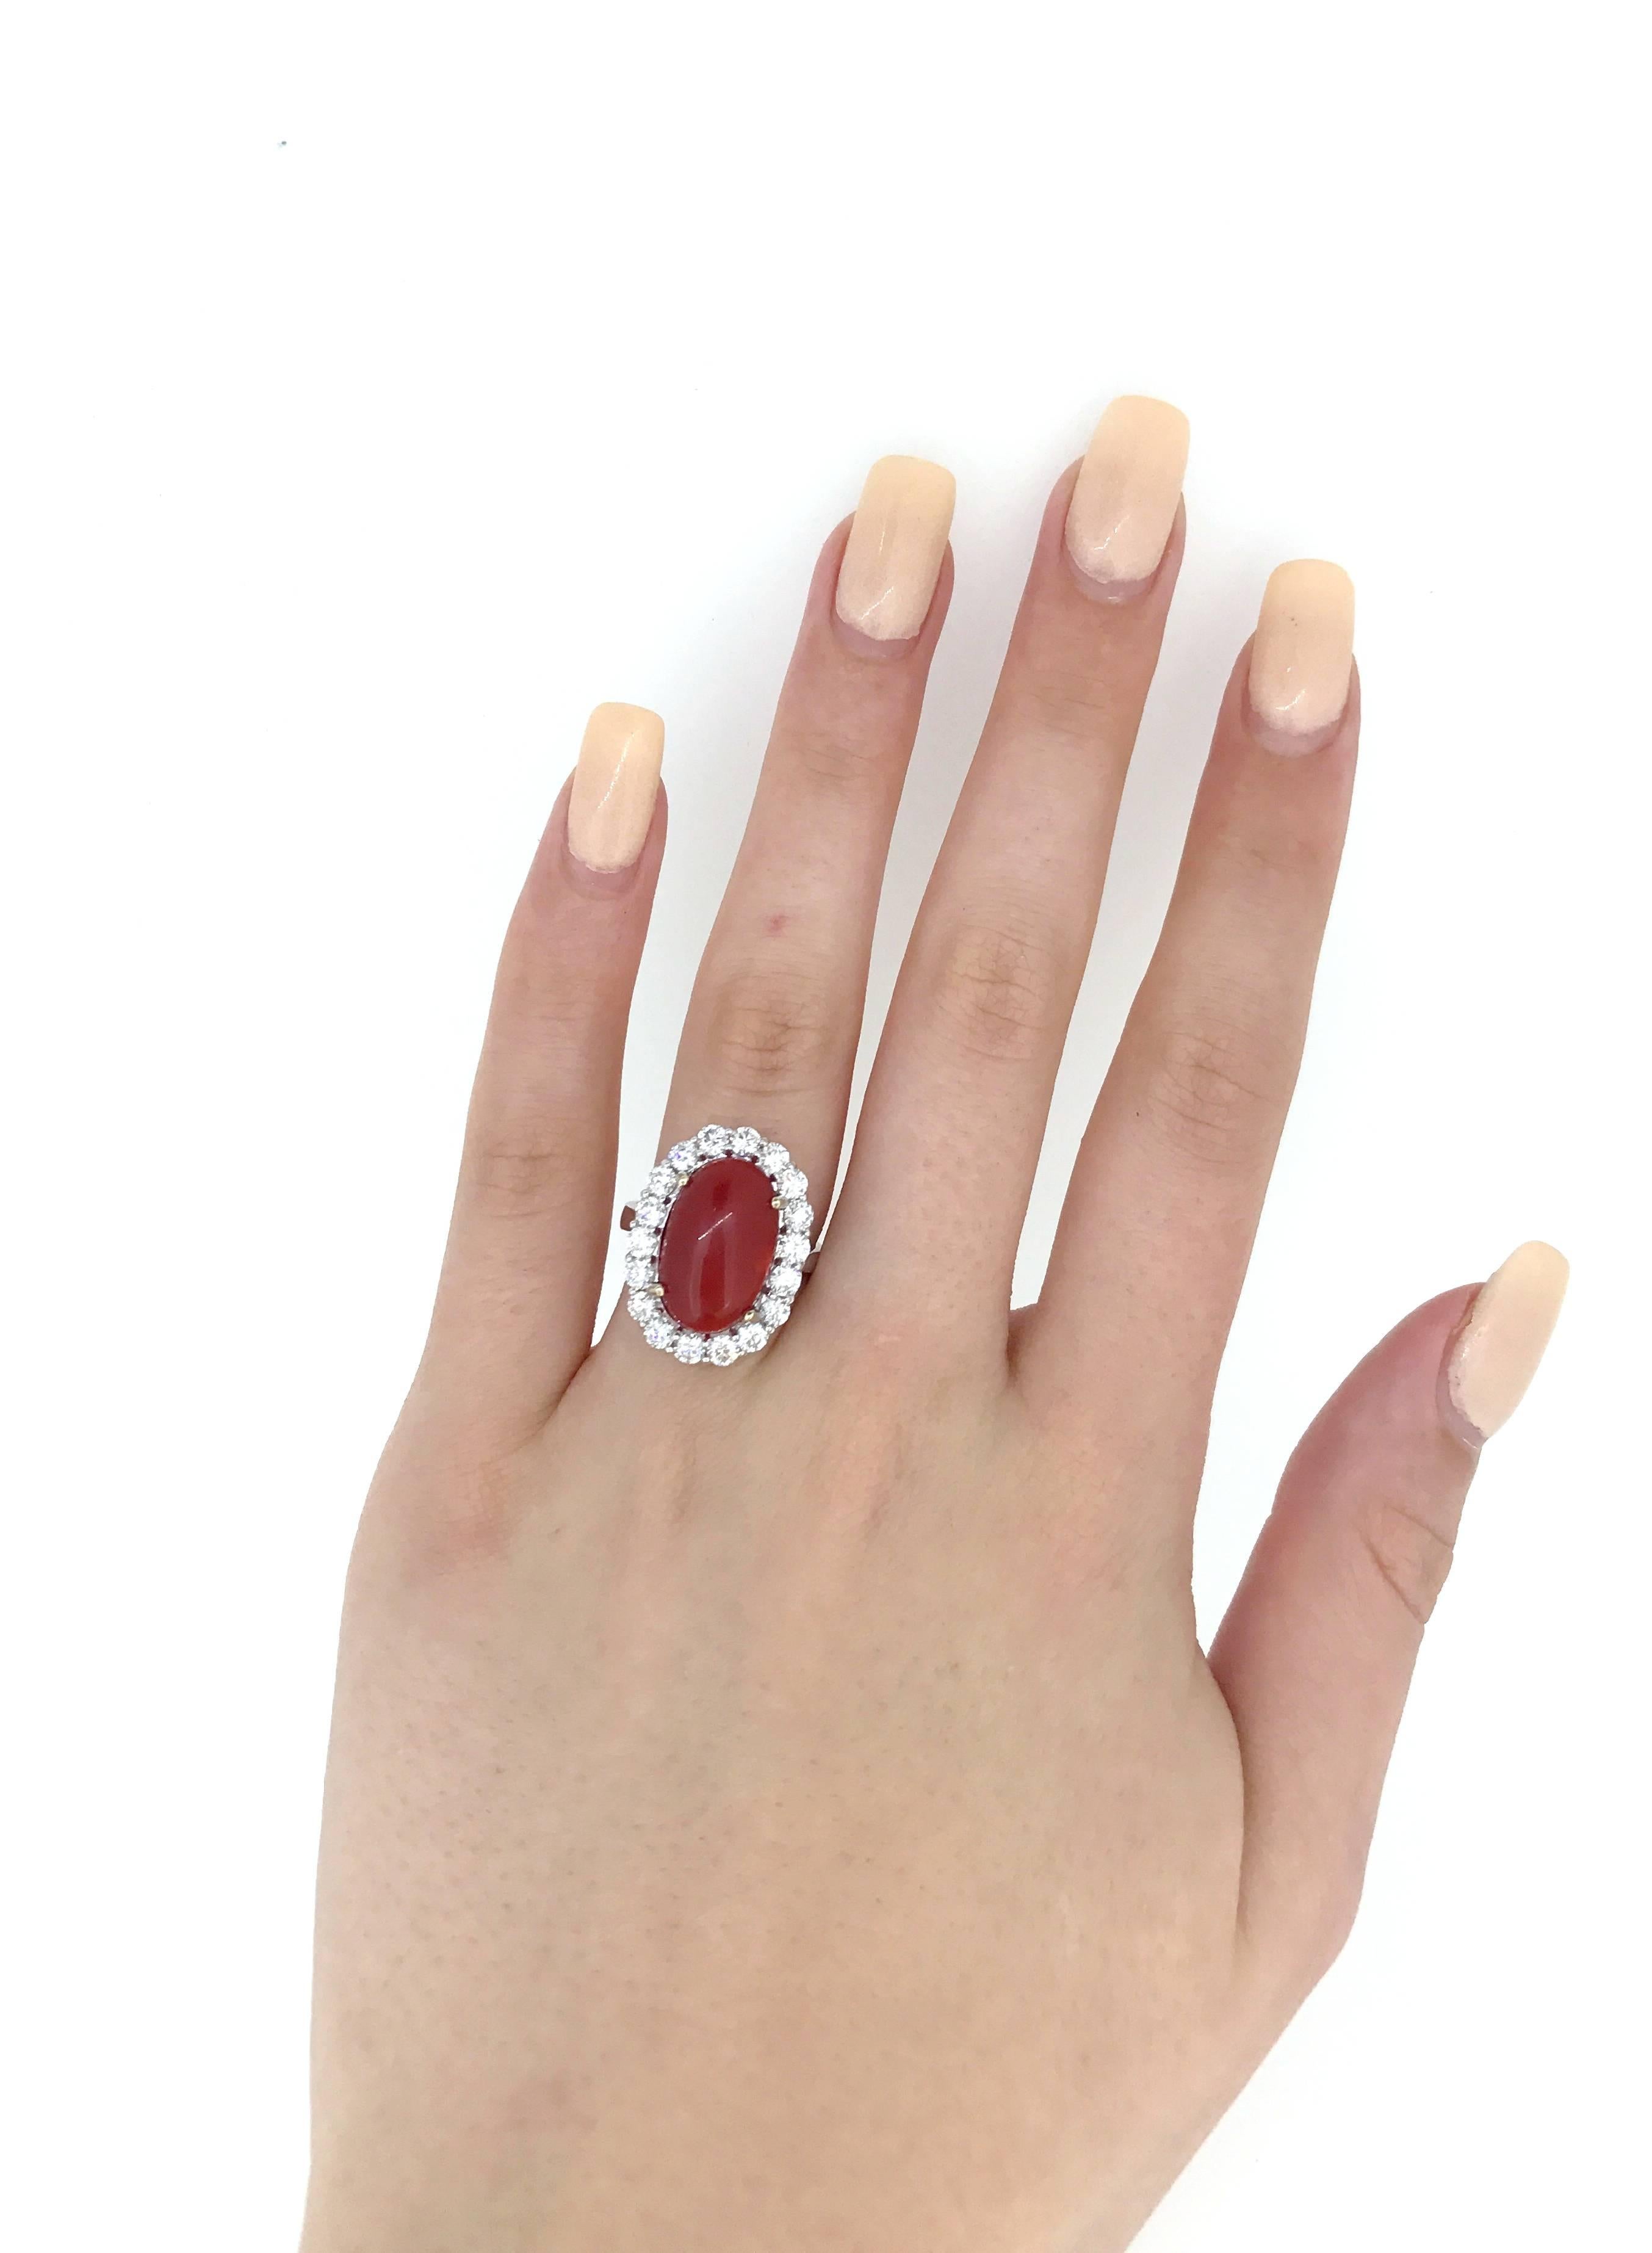 Round Cut 18 Karat White Gold Cabochon Red South Sea Coral and 1.8 Carat Diamond Ring For Sale